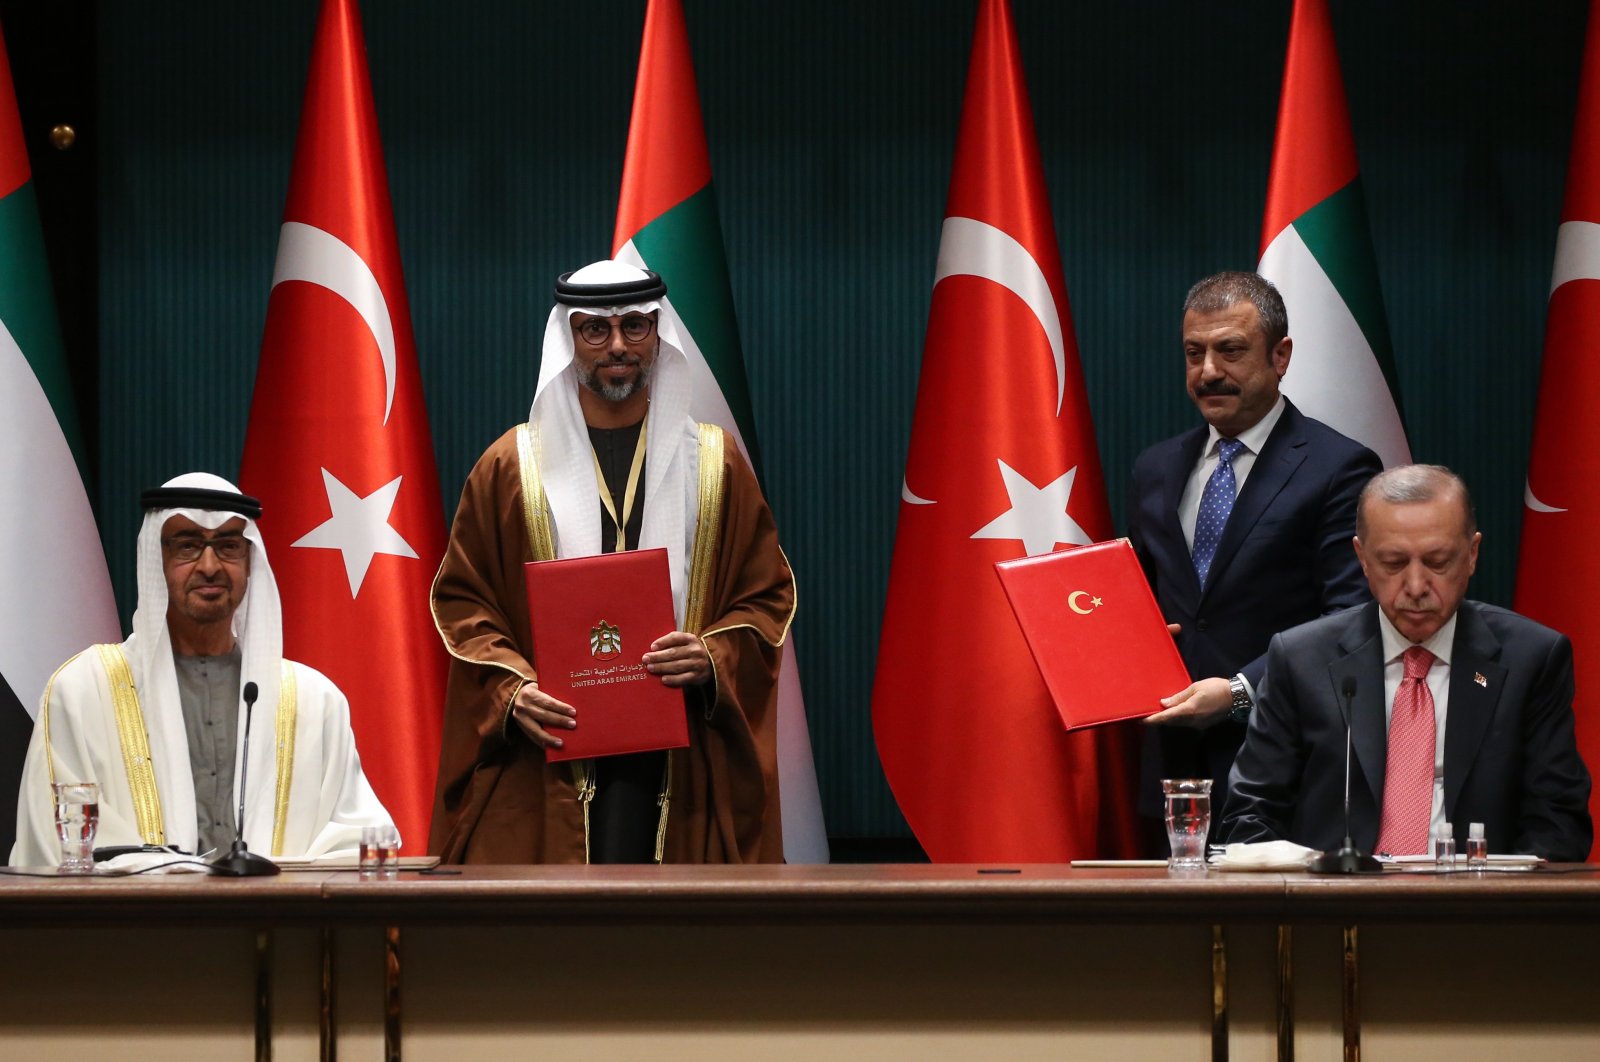 Crown Prince of Abu Dhabi Mohammed bin Zayed (MBZ) (L), UAE Minister of Energy and Industry Suhail Al Mazroui (L2), President Recep Tayyip Erdoğan (R) and CBRT Governor Şahap Kavcıoğlu (R2) during an agreement ceremony after their meeting at the Presidential Complex in Ankara, Turkey, Nov. 24, 2021. (EPA Photo)